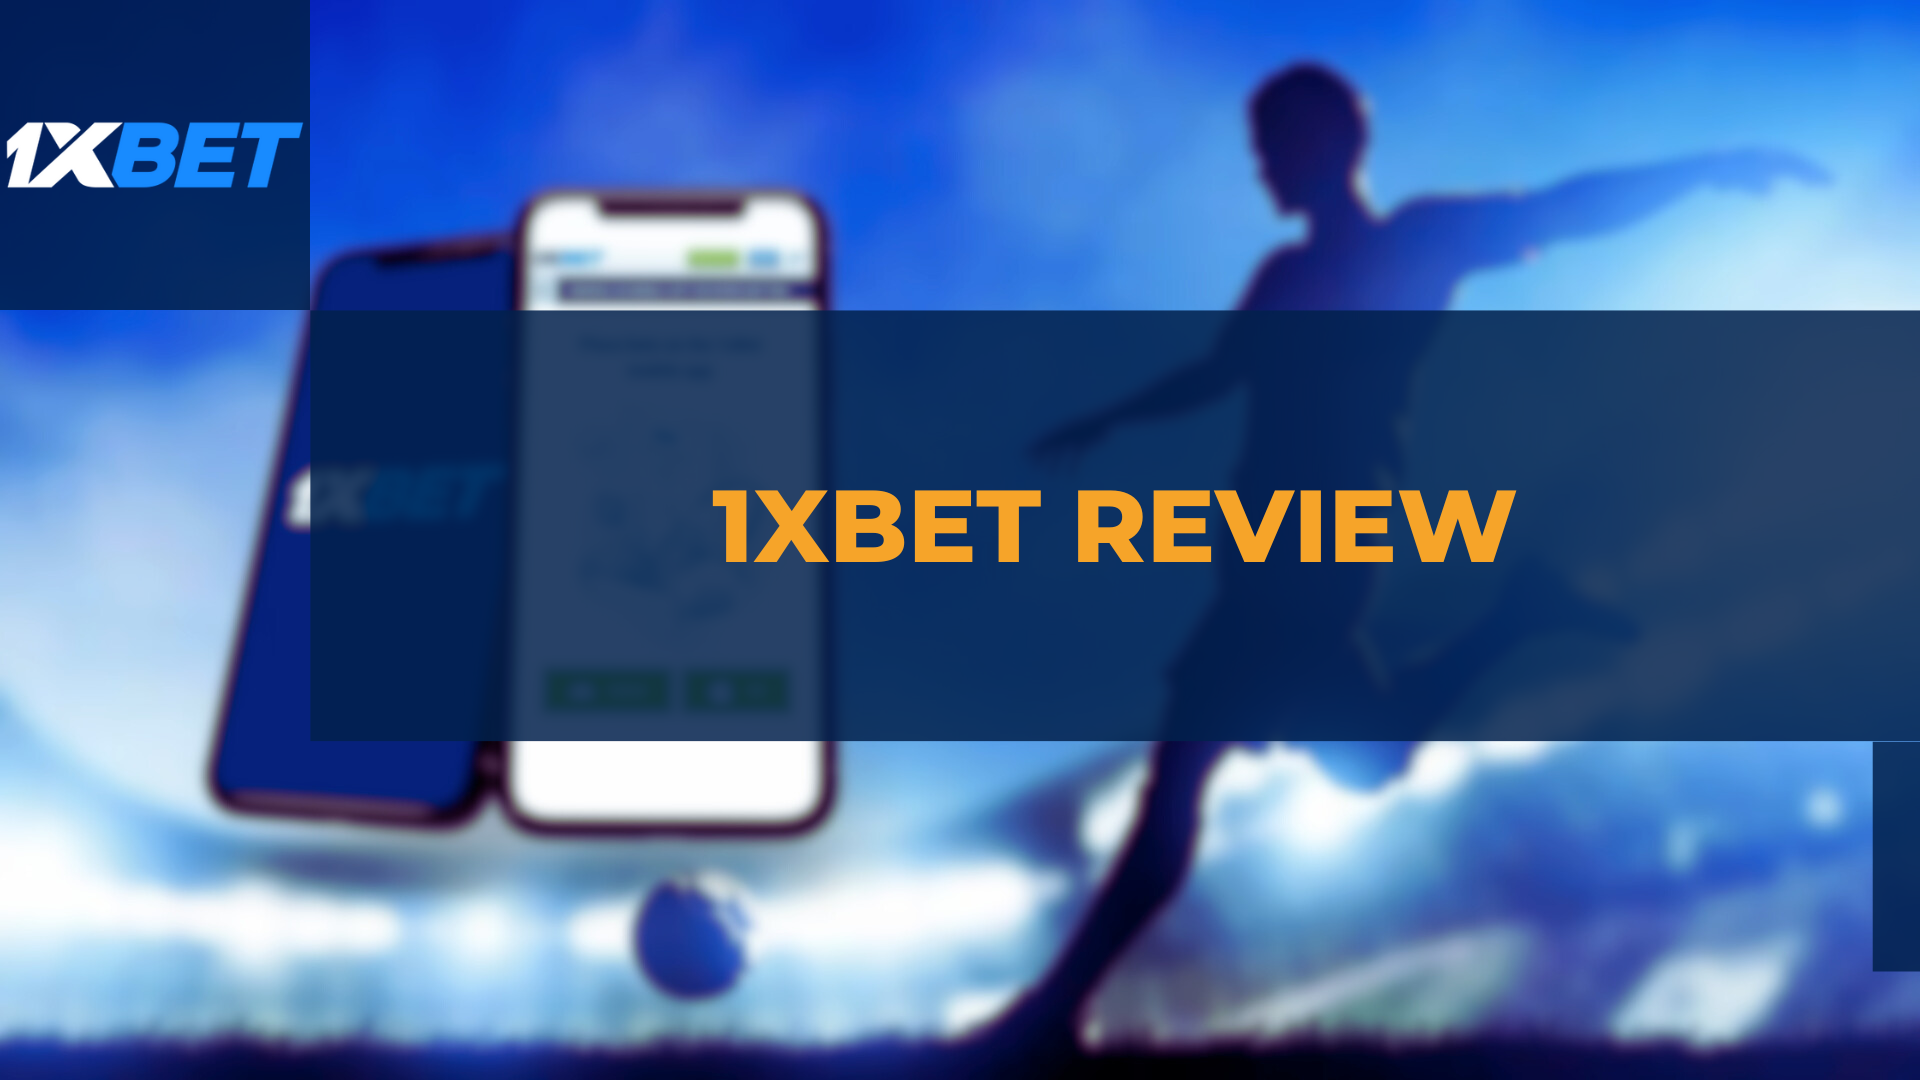 Overview of 1xBet, including gaming options, mobile app installation, and betting lines